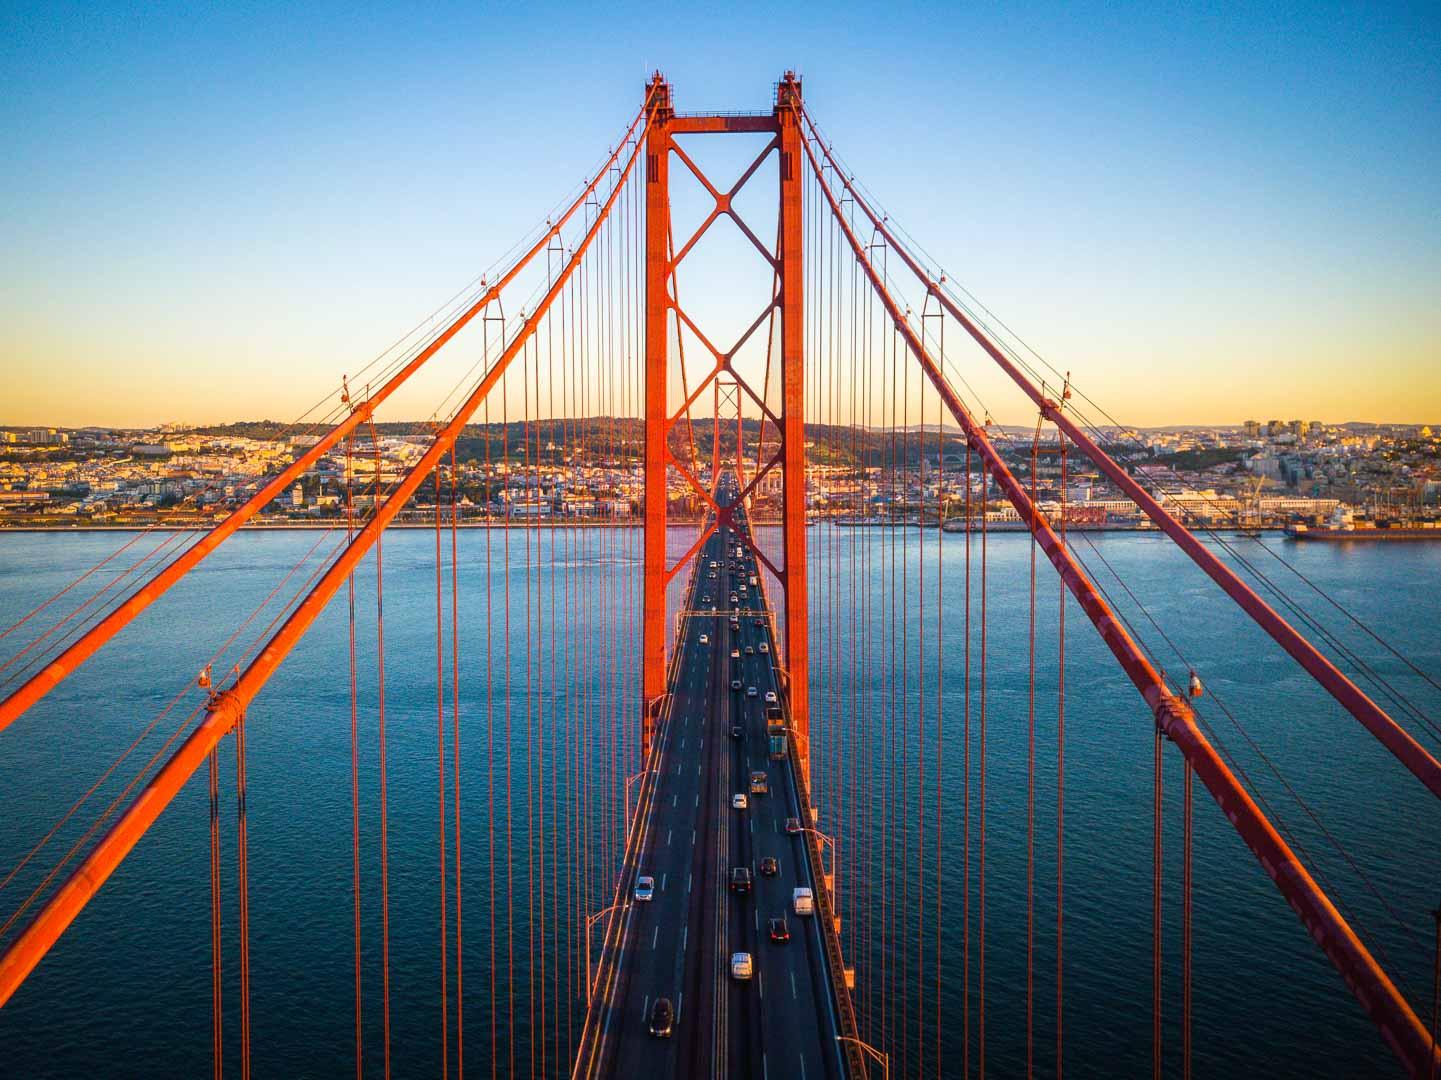 ponte 25 de abril is one of the famous monuments in portugal